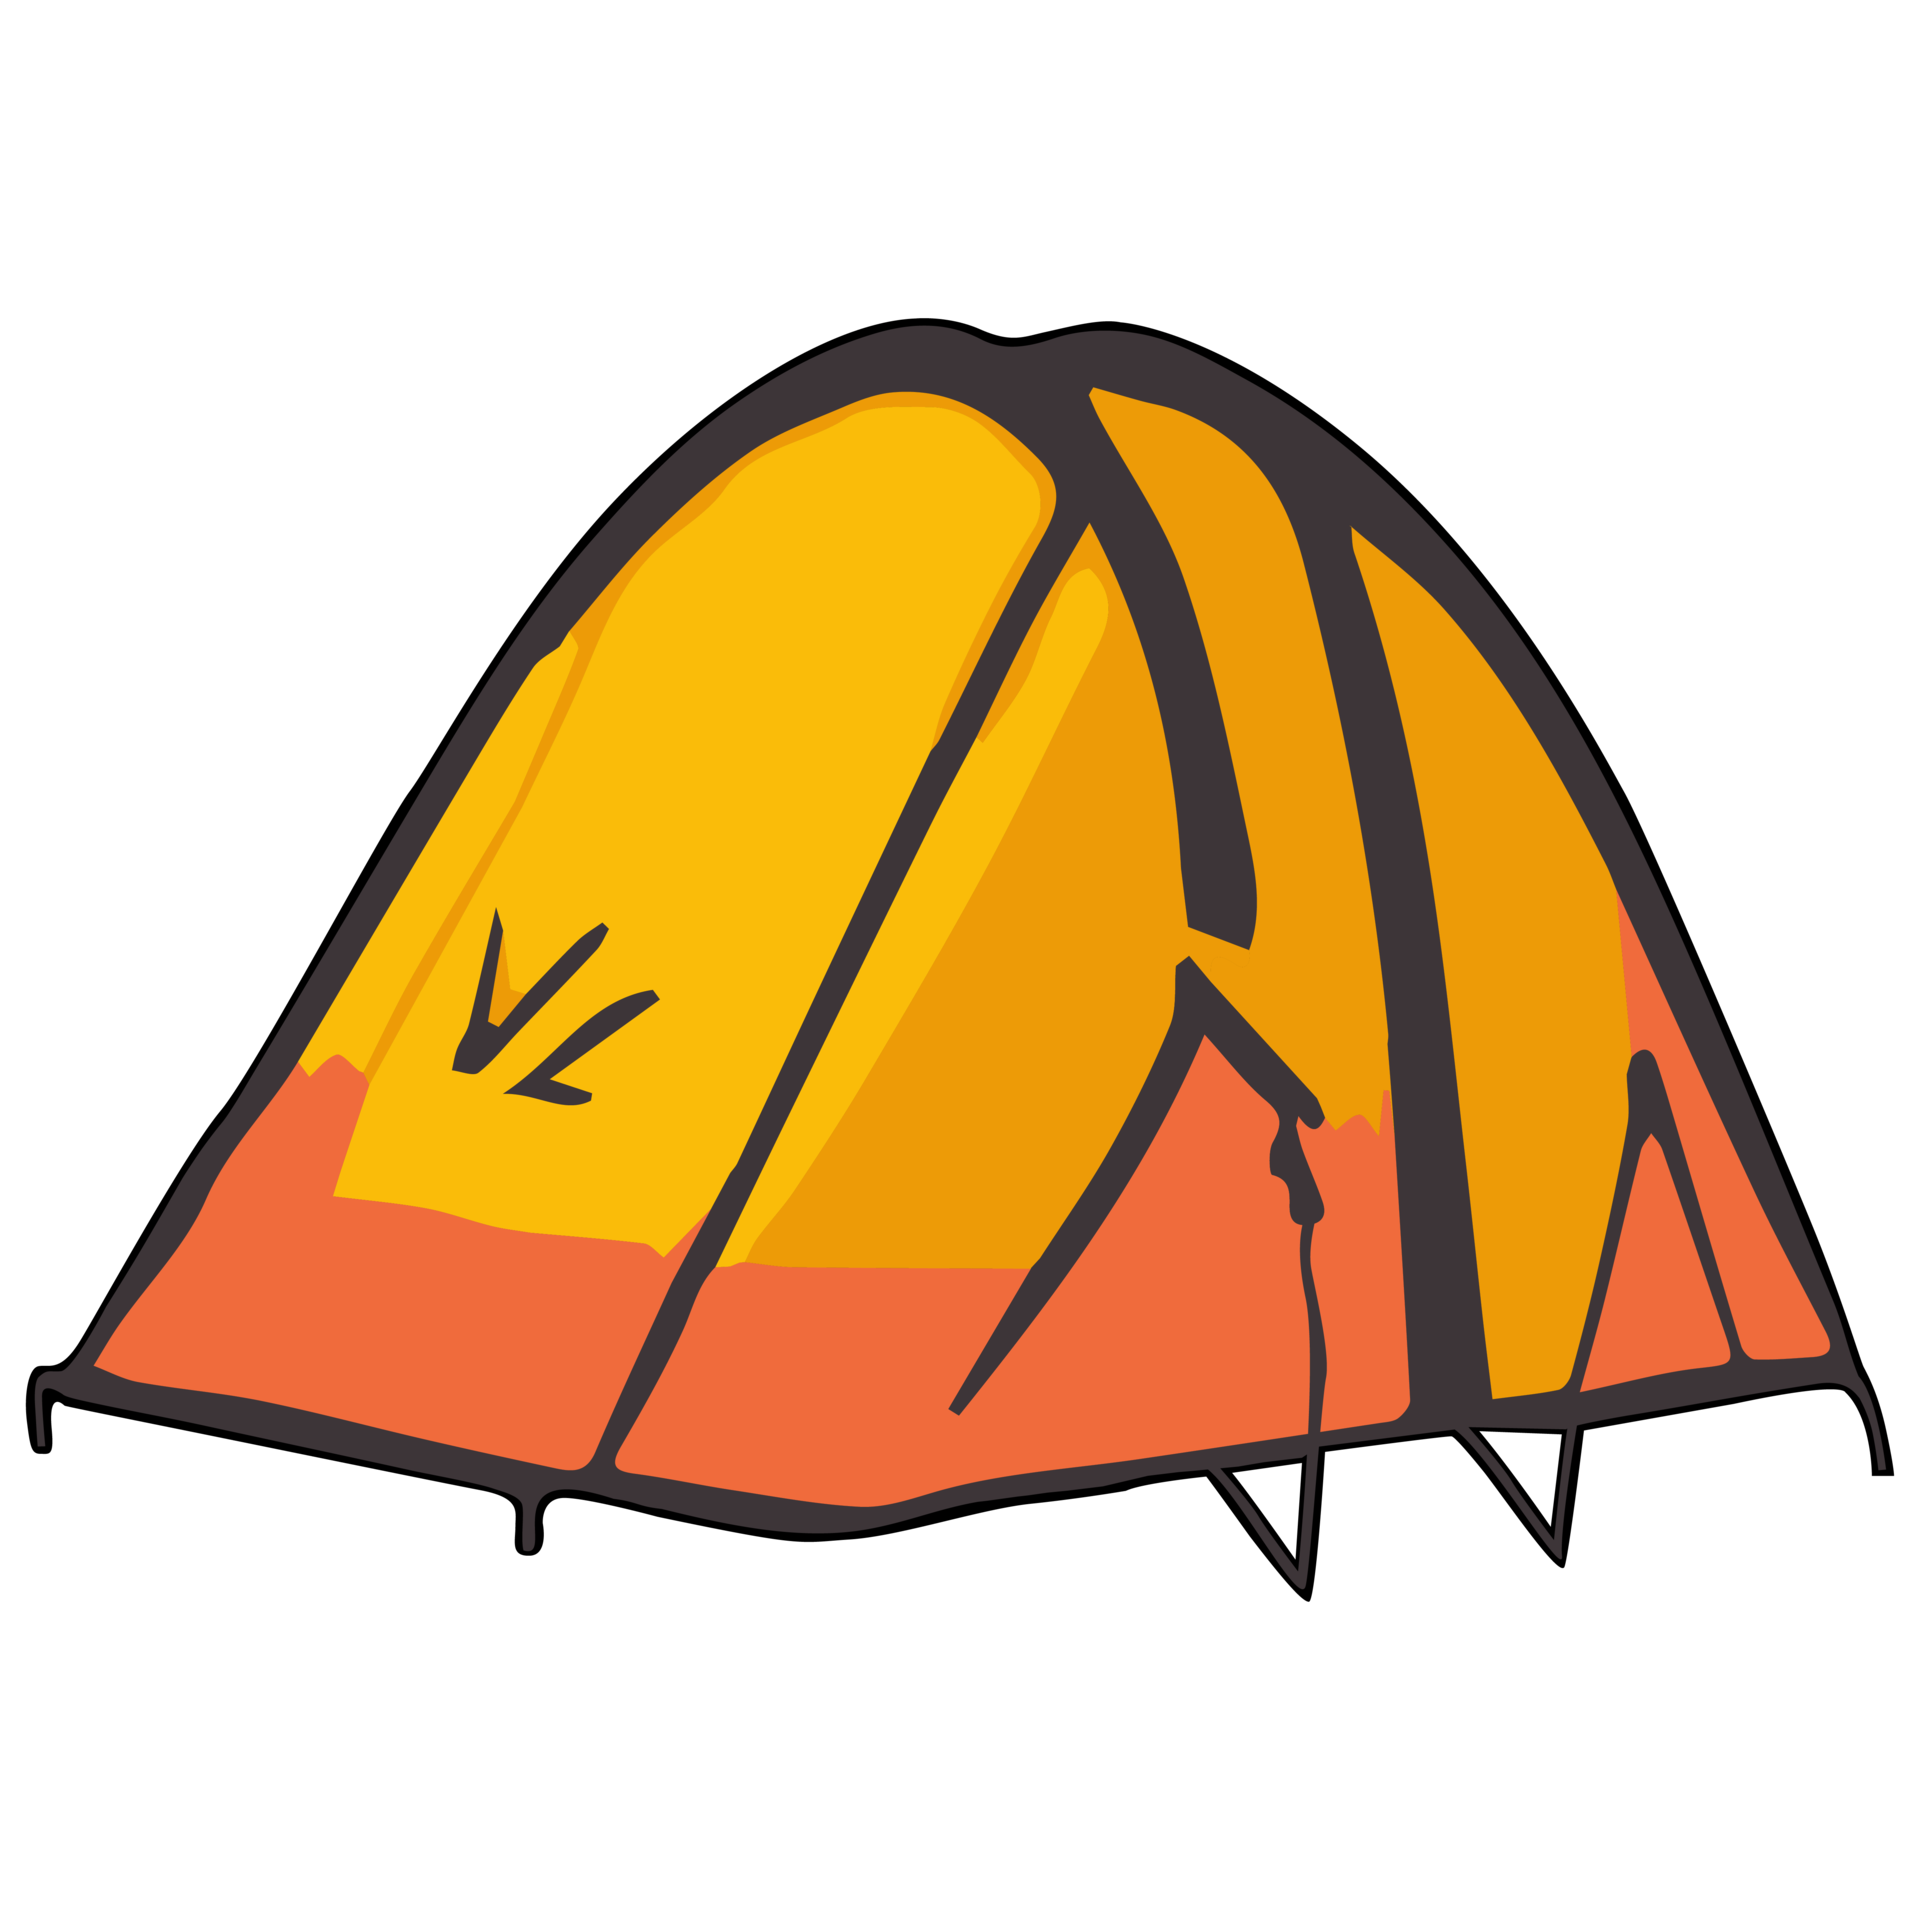 Camping tent clipart flat design on transparent background, camping ...